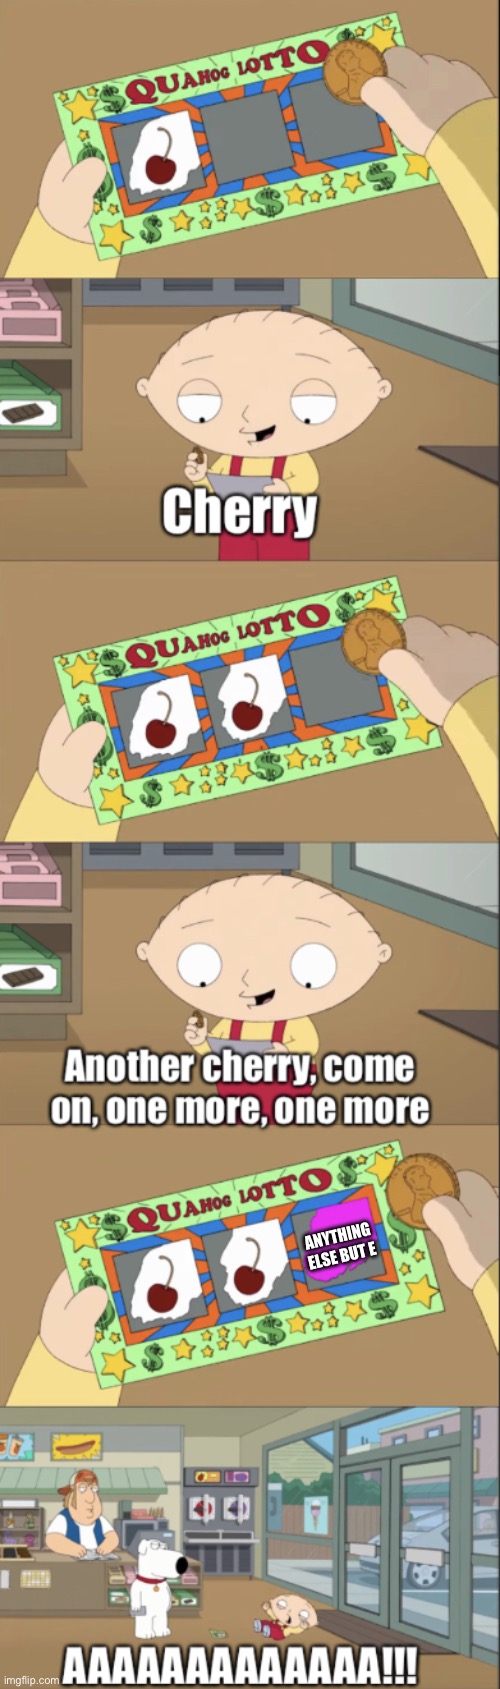 Stewie scratch card | ANYTHING ELSE BUT E | image tagged in stewie scratch card | made w/ Imgflip meme maker